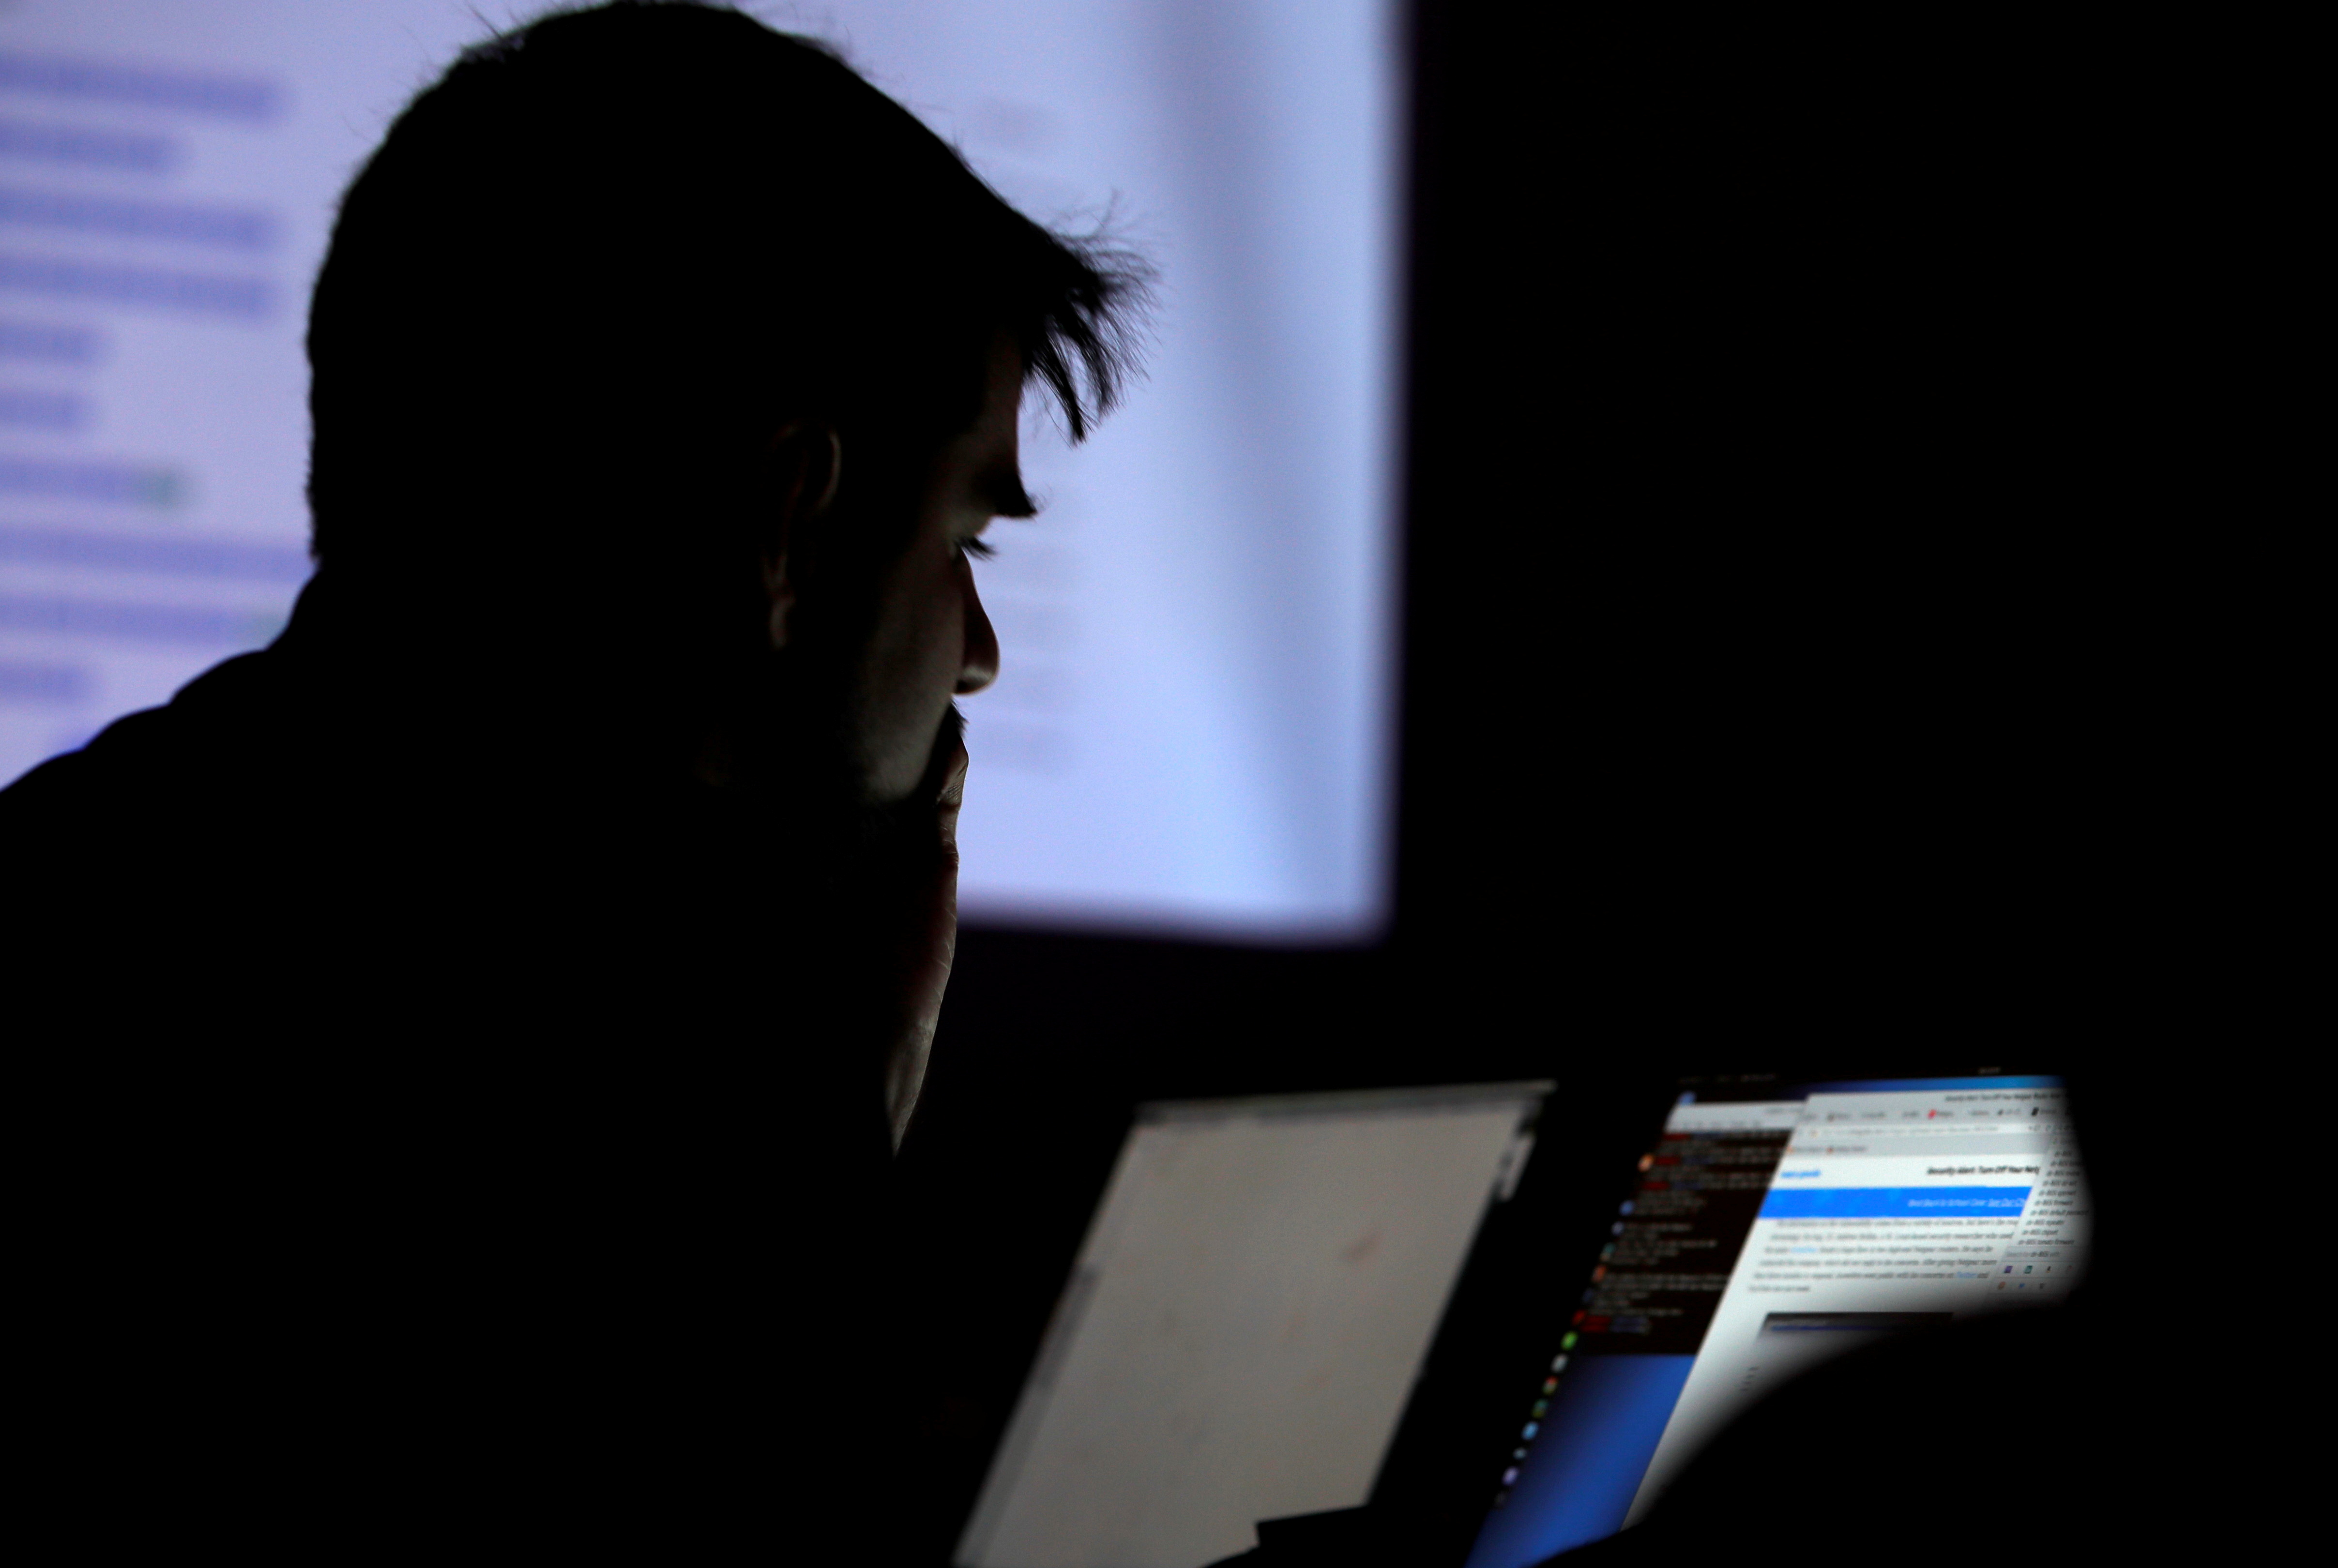 FILE PHOTO: A man takes part in a hacking contest during the Def Con hacker convention in Las Vegas, Nevada, U.S. on July 29, 2017. REUTERS/Steve Marcus/File Photo